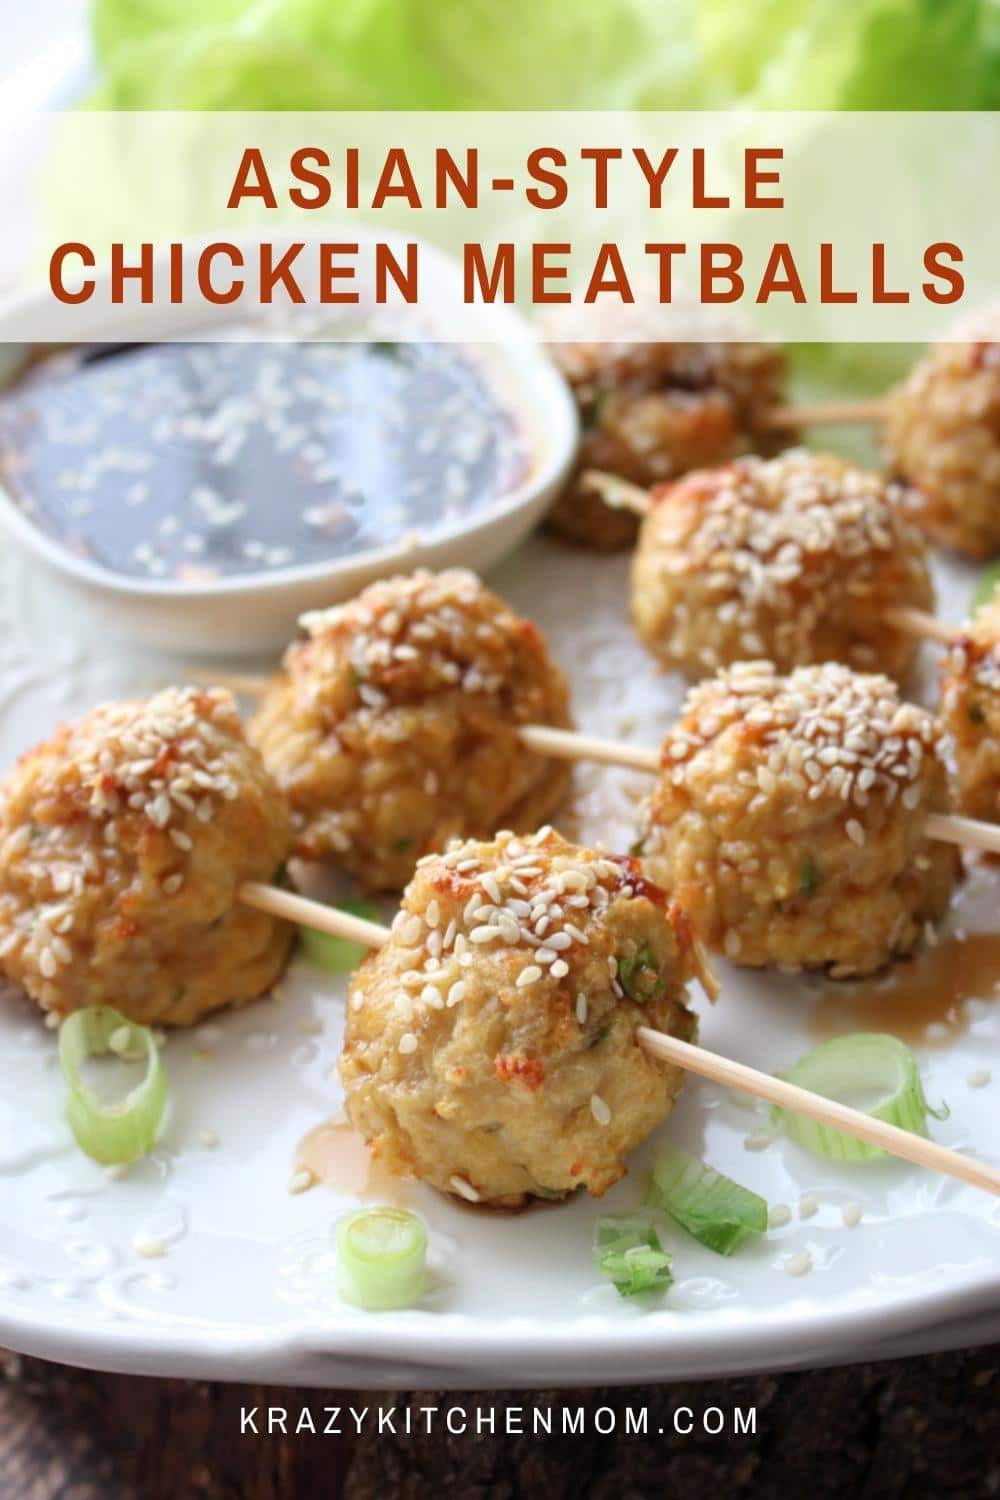 Sweet-tangy healthy  meatballs made with ground chicken. They are great for a quick easy weeknight dinner or as an easy appetizer. via @krazykitchenmom